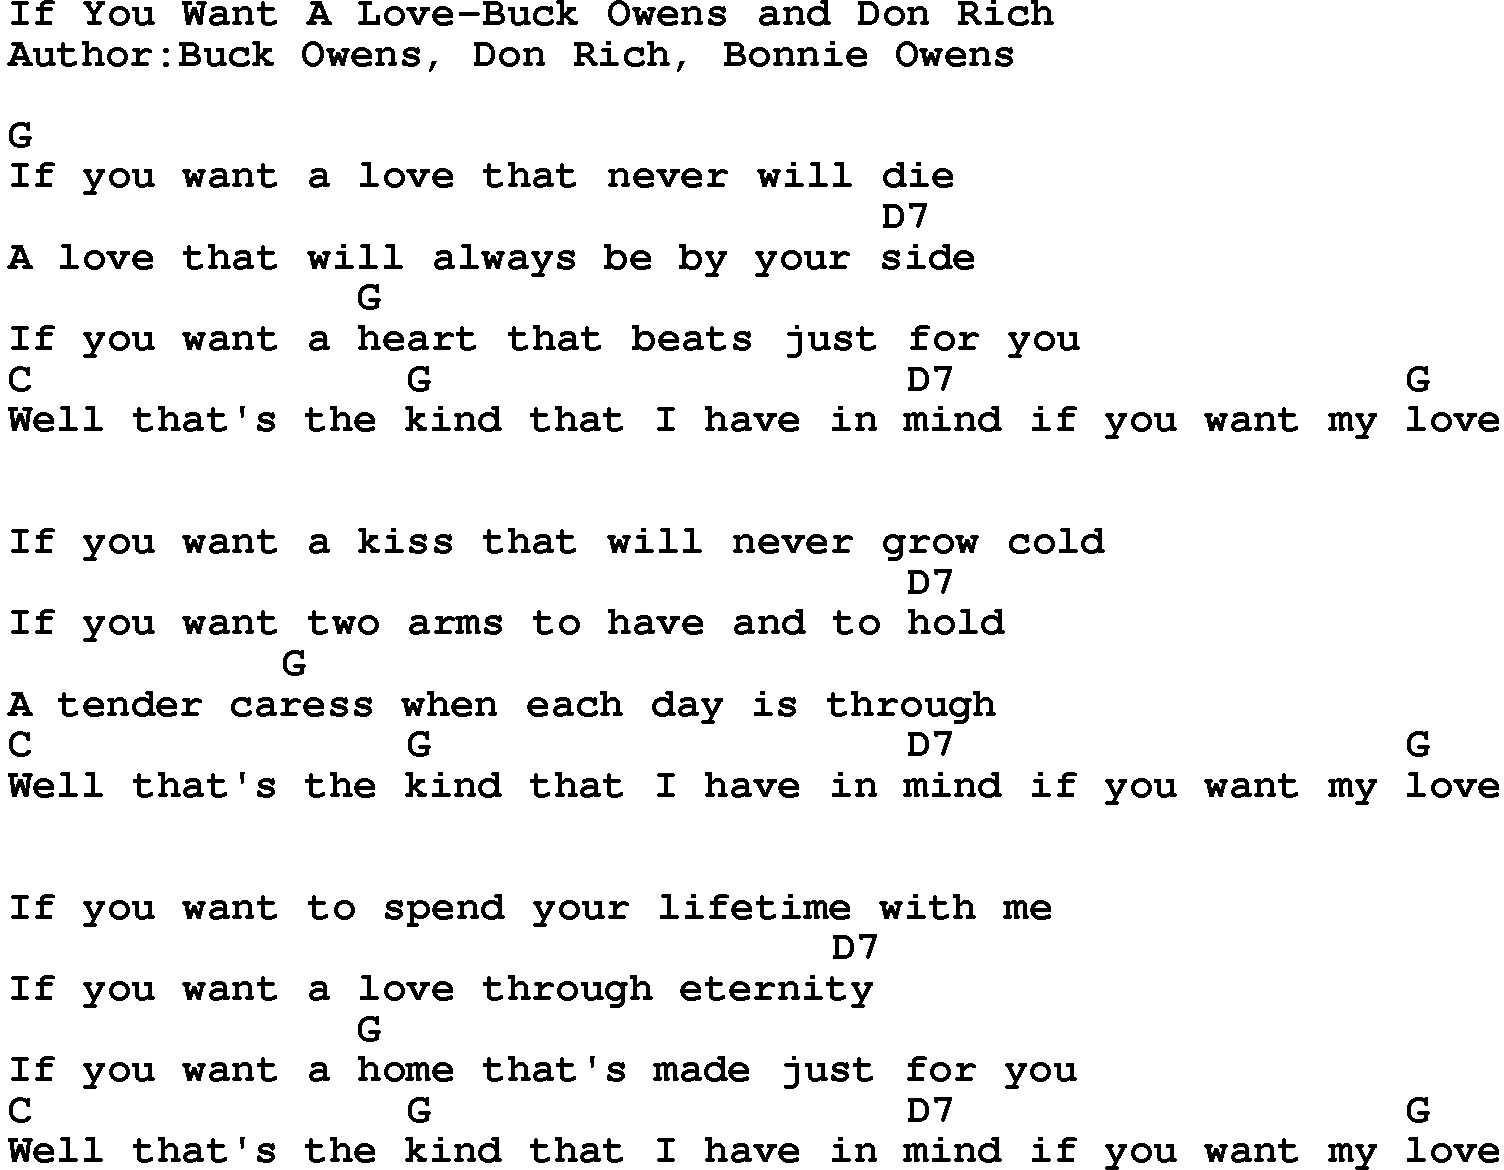 Country music song: If You Want A Love-Buck Owens And Don Rich lyrics and chords